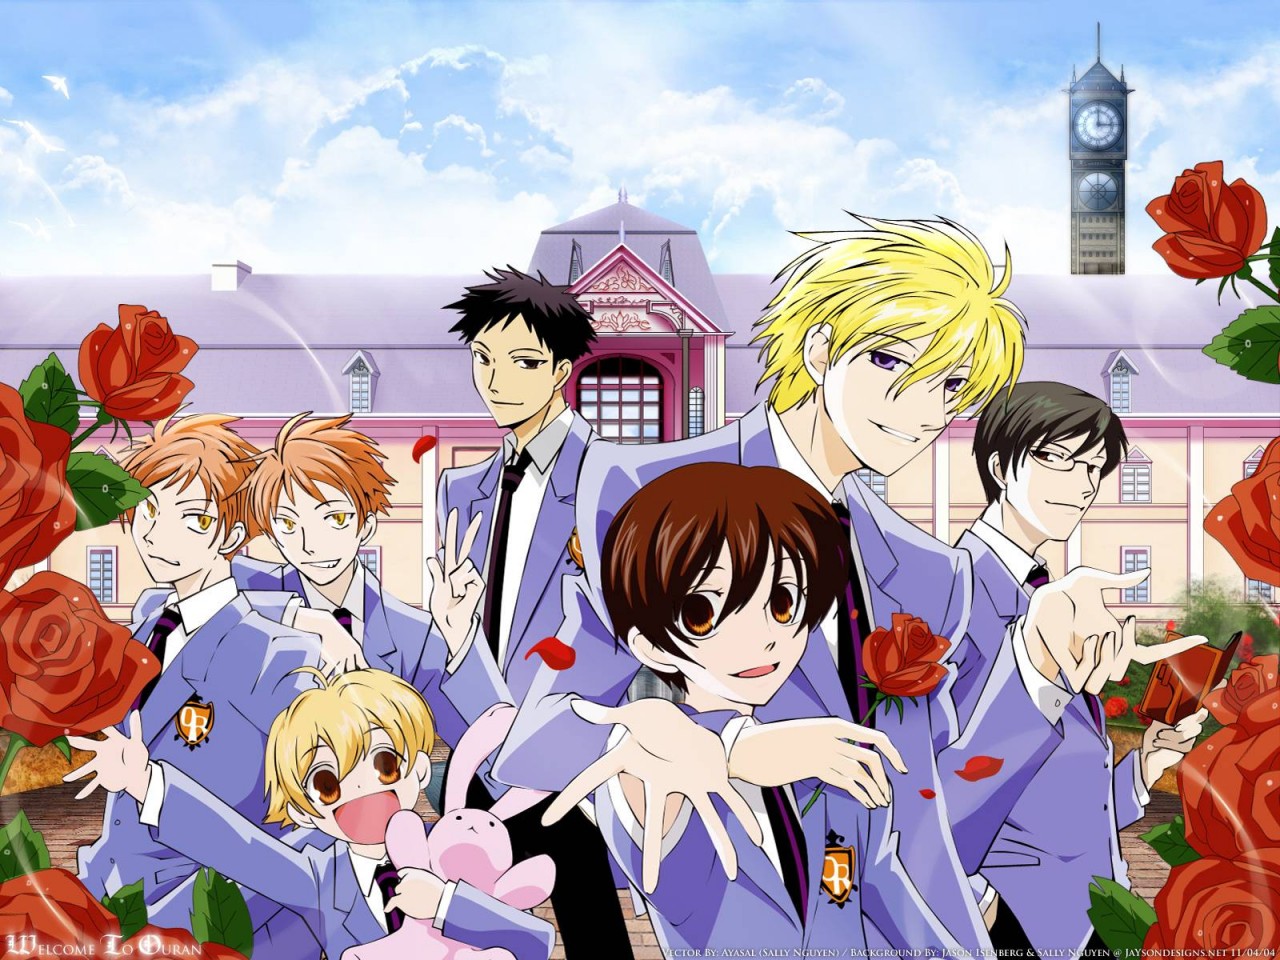 After School Club  Other  Anime Background Wallpapers on Desktop Nexus  Image 1911794